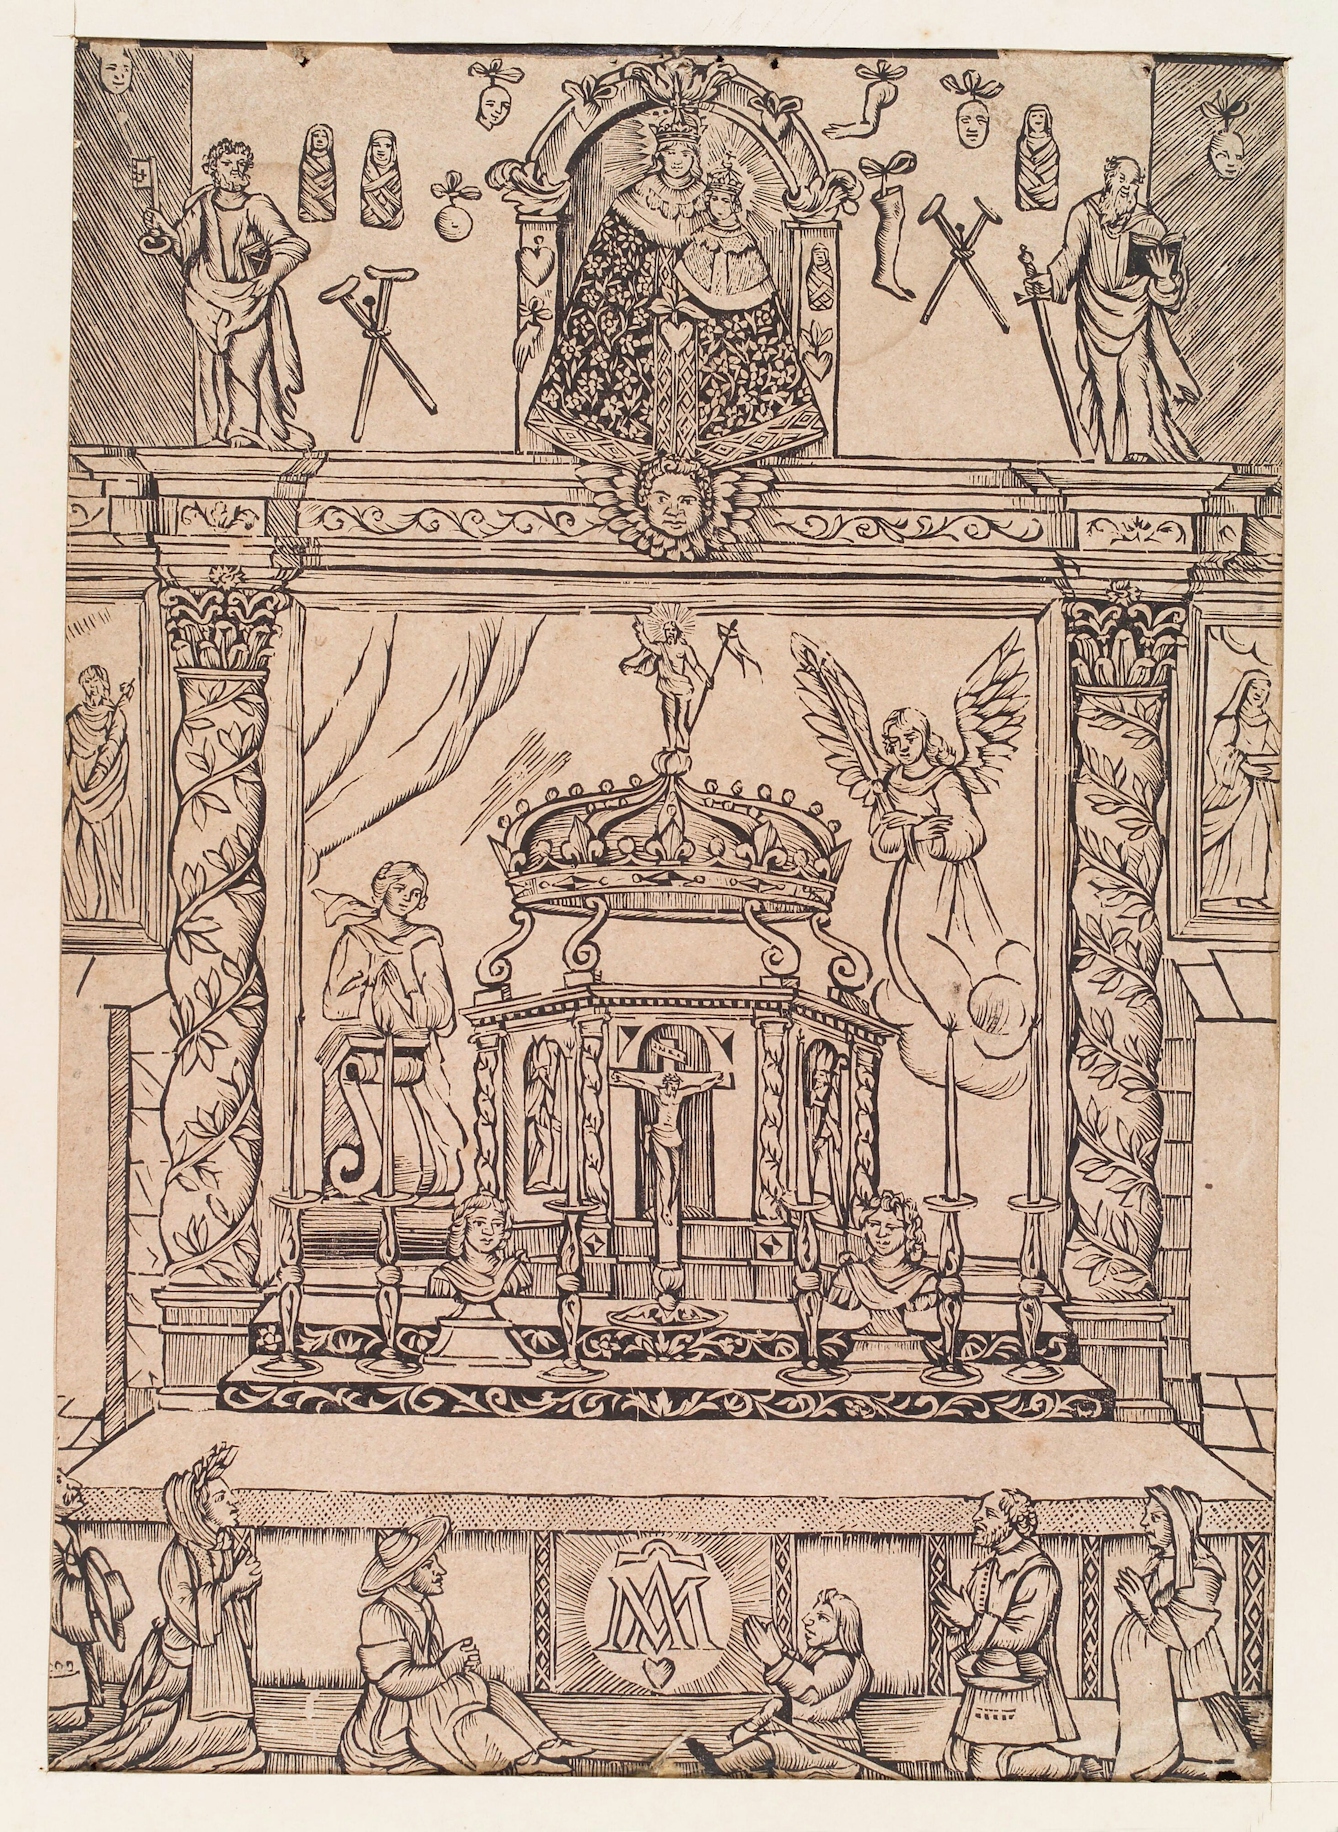 Woodcut of an altar. Above the altar there is a statue of The Virgin within an arch with the Christ Child, both crowned. Around the arch and on the wall to the sides are hearts, swaddled babies, crutches, legs, arms, etc. Left and right, there are figures of St Peter and Saint Paul. Below, there is an altar decorated with Salomonic columns, decorated with a crown and figures of Jesus Christ crucified. There are several people kneeling at the front of the altar praying. A few of them appear to be injured or ill. 